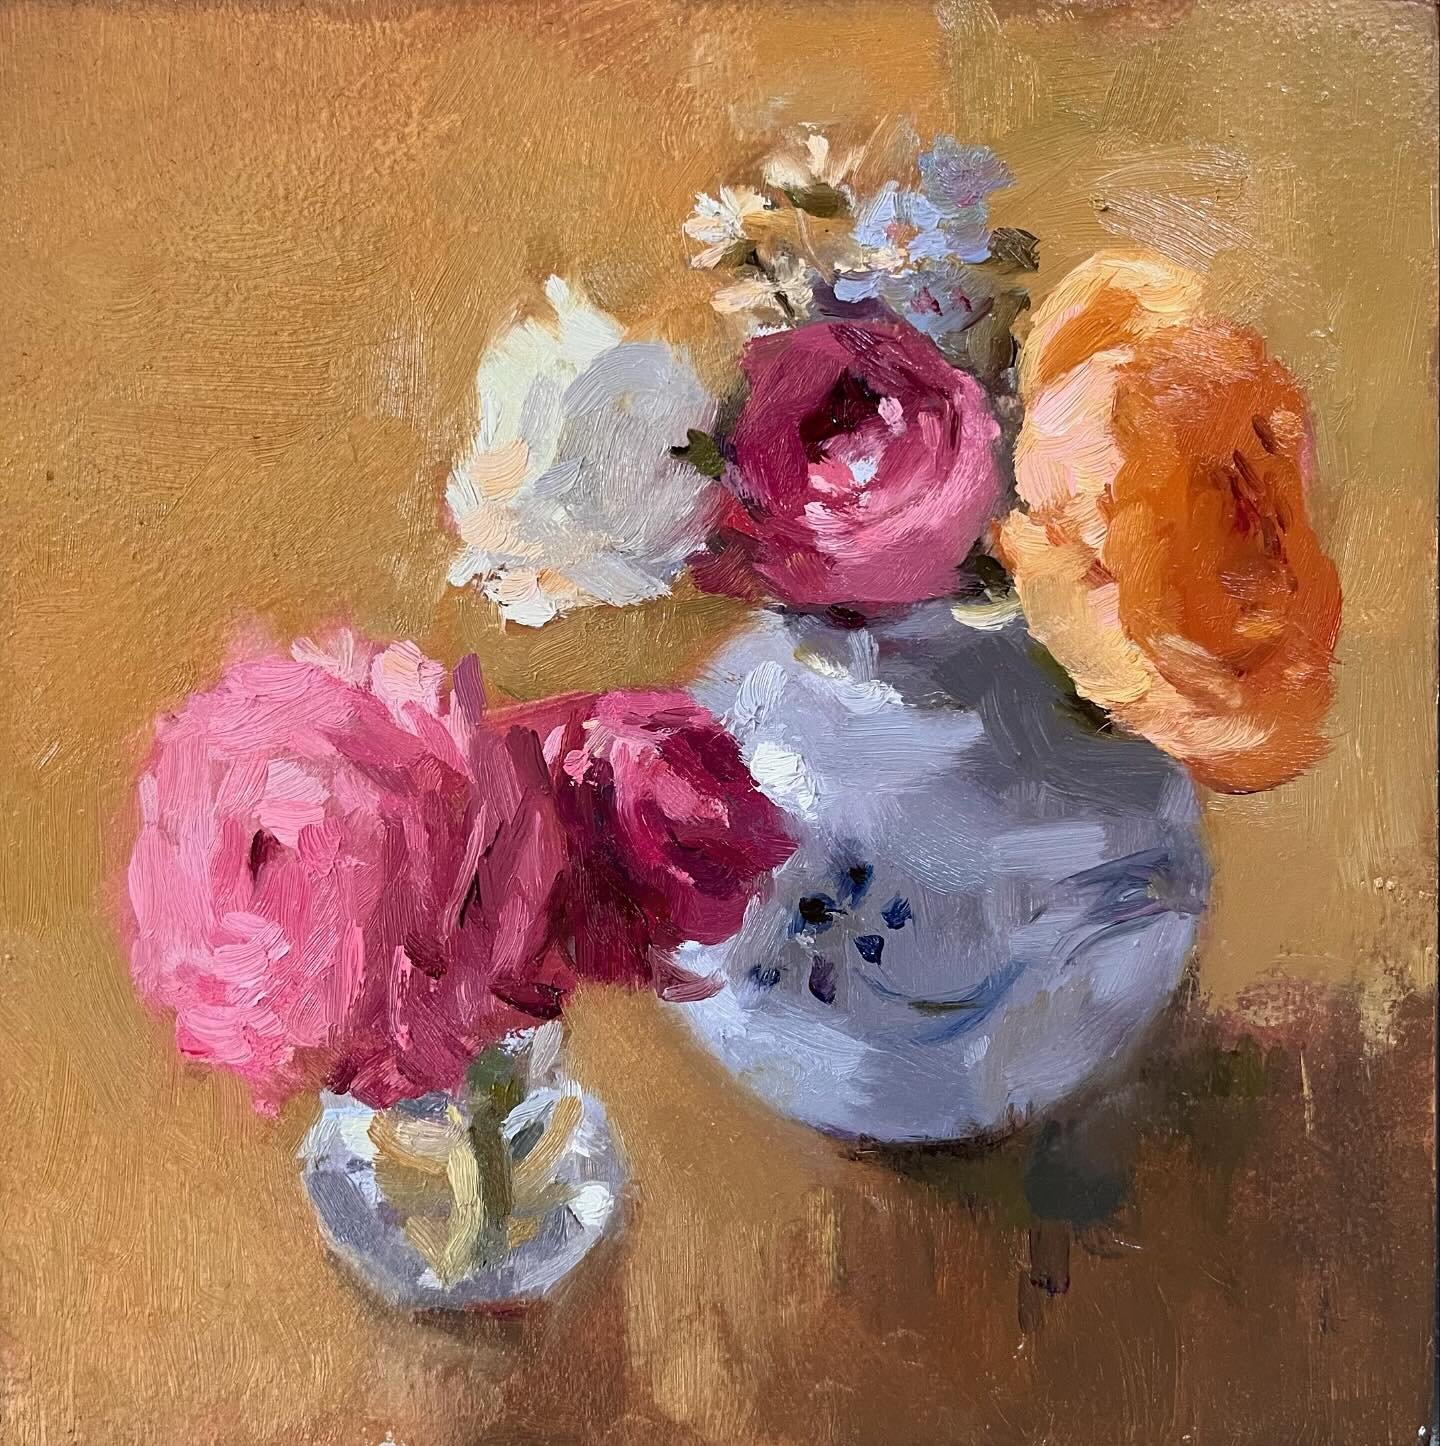 Flower Power, Oil on board, 7 x 7 inches.  Rununculas, lisianthus and forget-me-nots  in two of my favourite vases for tiny flowers. I tried to paint them really simply after looking at Manet&rsquo;s flowers. And to make it all about the gorgeous col